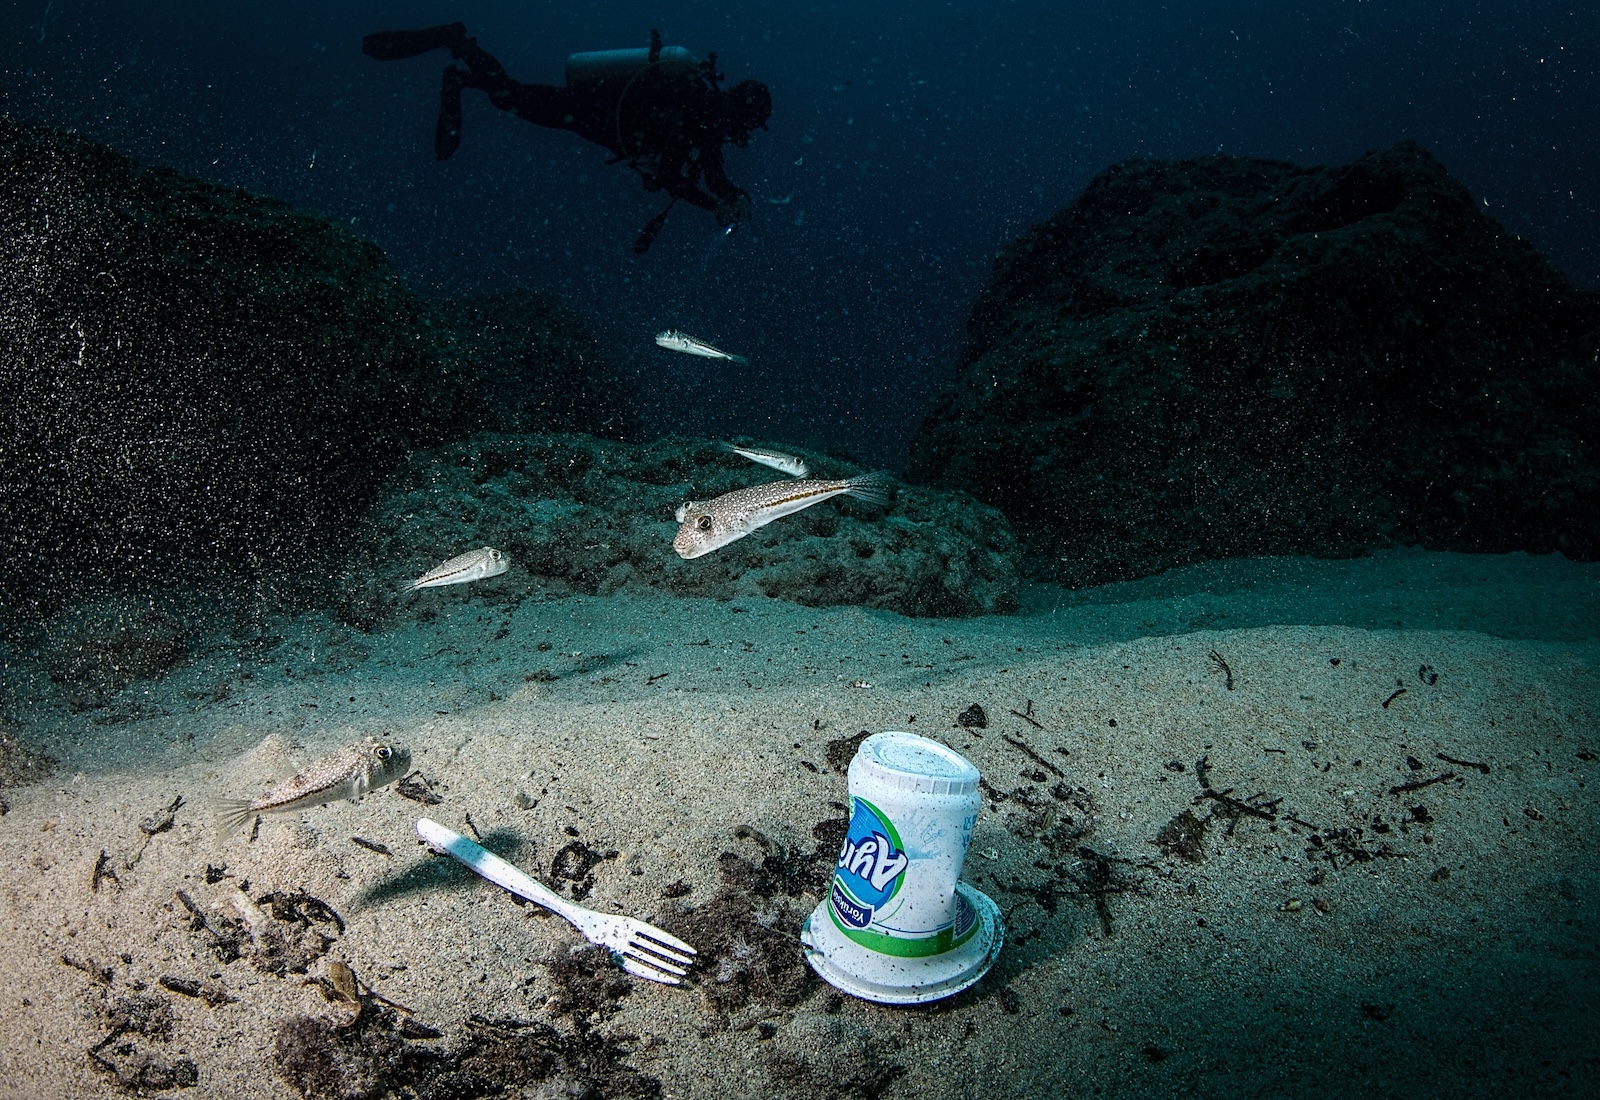 A plastic yogurt cup and fork on the seafloor, with a fish swimming in the background. A diver is in the far background.